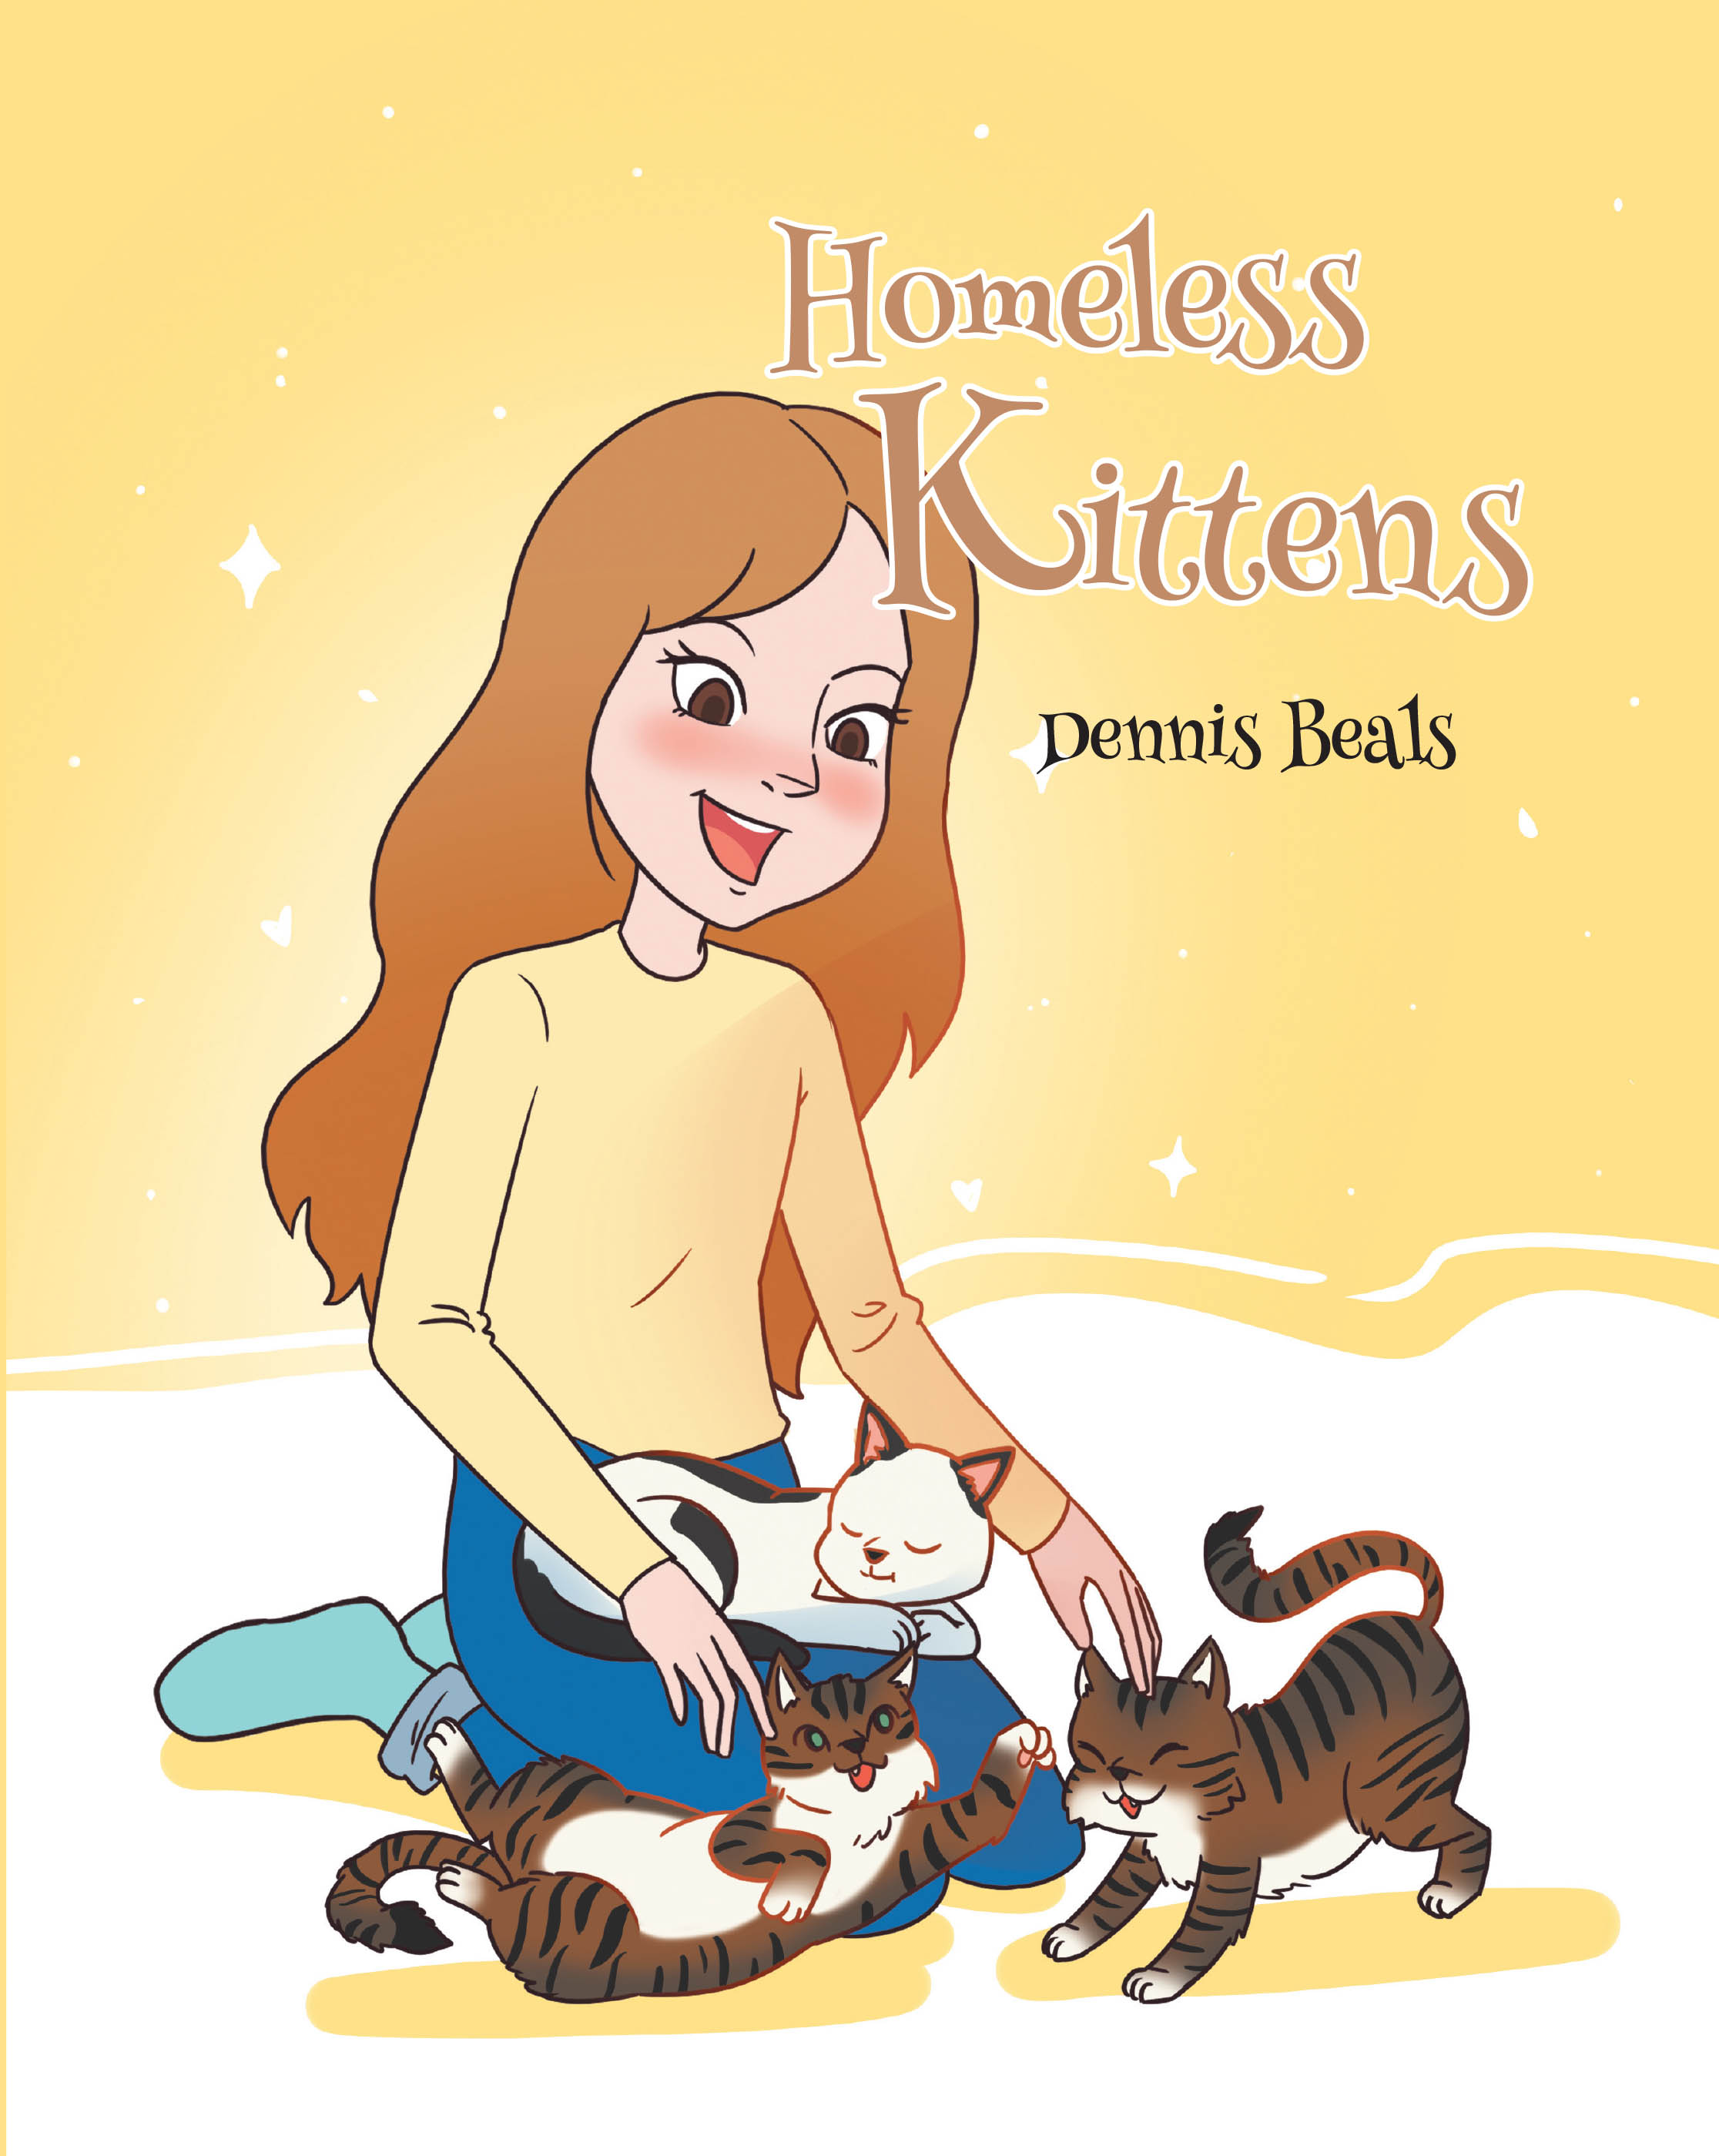 Dennis Beals’s Newly Released "Homeless Kittens" is a Delightful Tale of the Mischievous Nature of Kittens